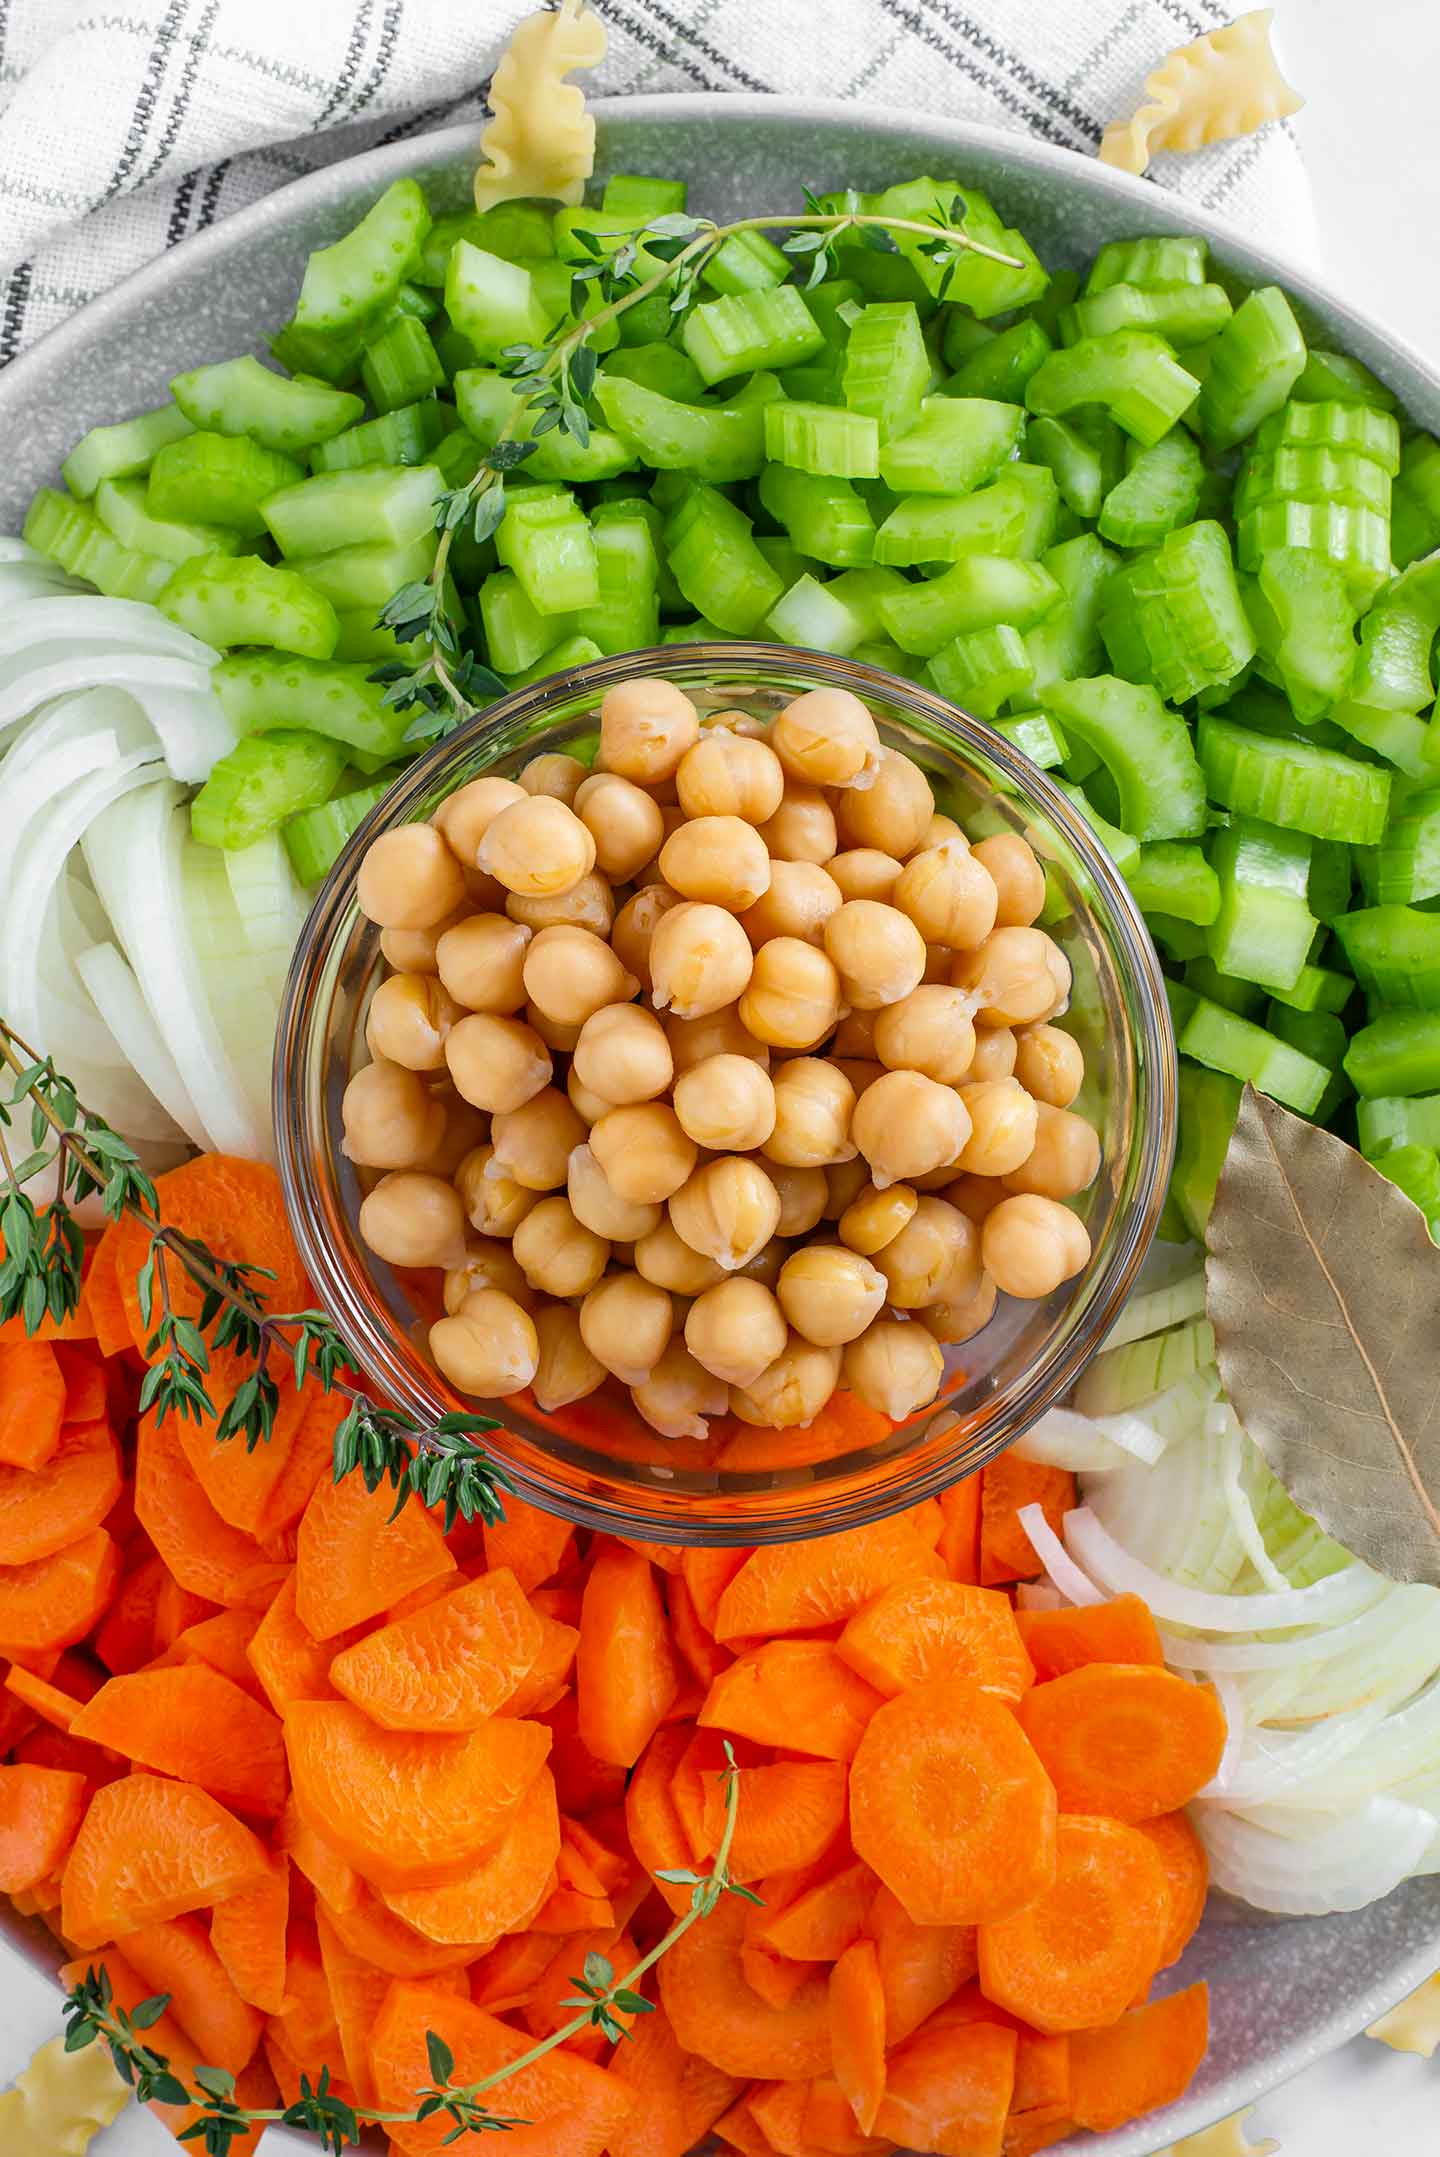 Top down view of chickpeas in a small glass bowl with chopped celery, chopped carrots, and sliced onion displayed around.